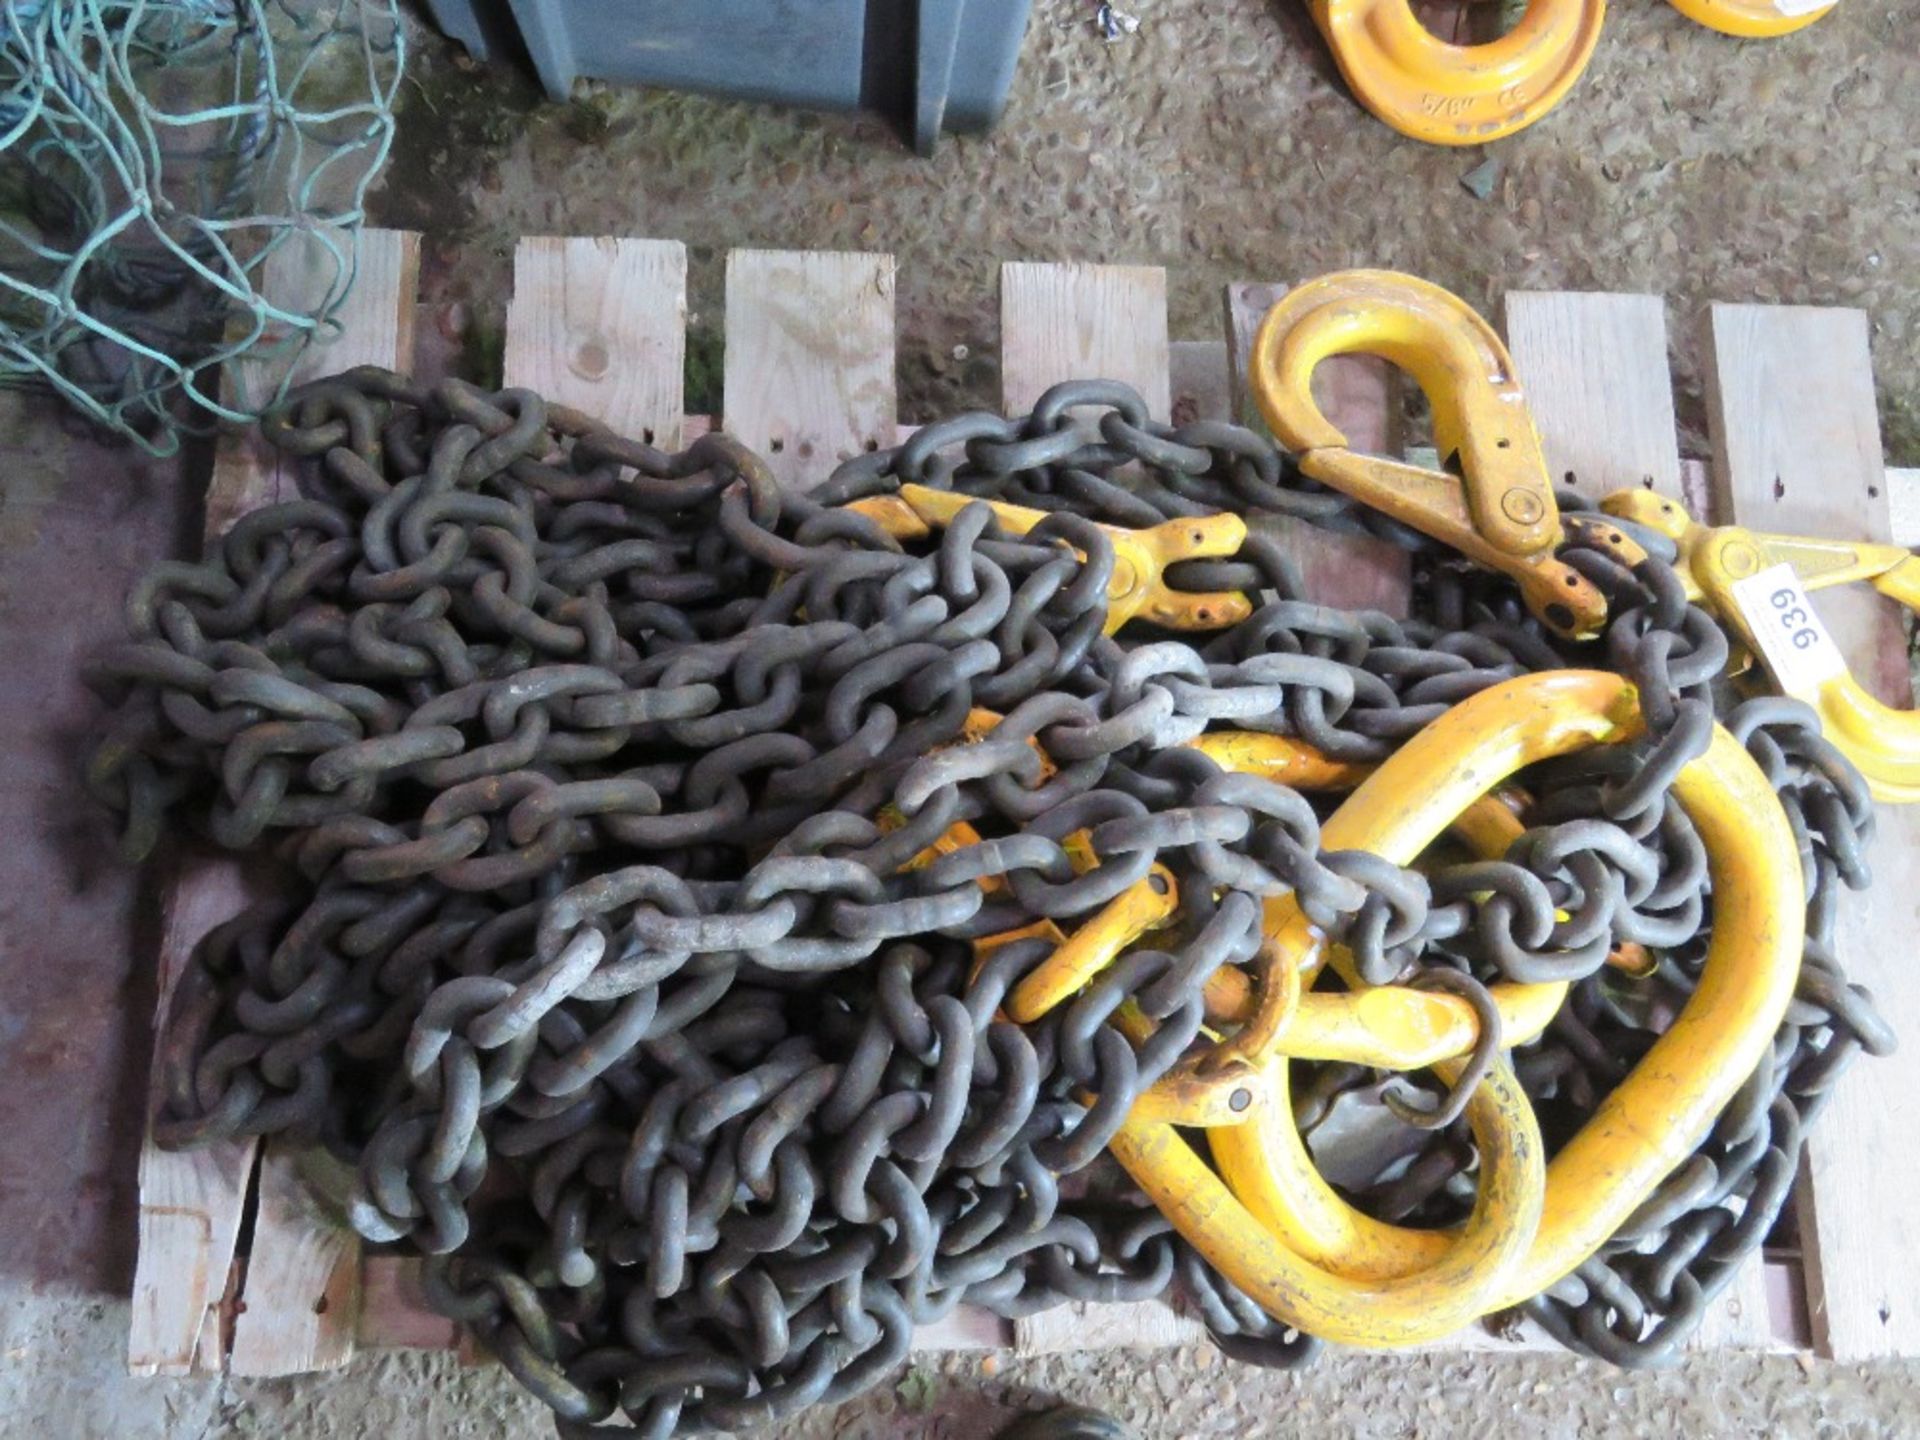 HEAVY DUTY SET OF 4 LEGGED LIFING CHAINS WITH SHORTENERS, SOURCED FROM DEPOT CLEARANCE. - Image 2 of 2